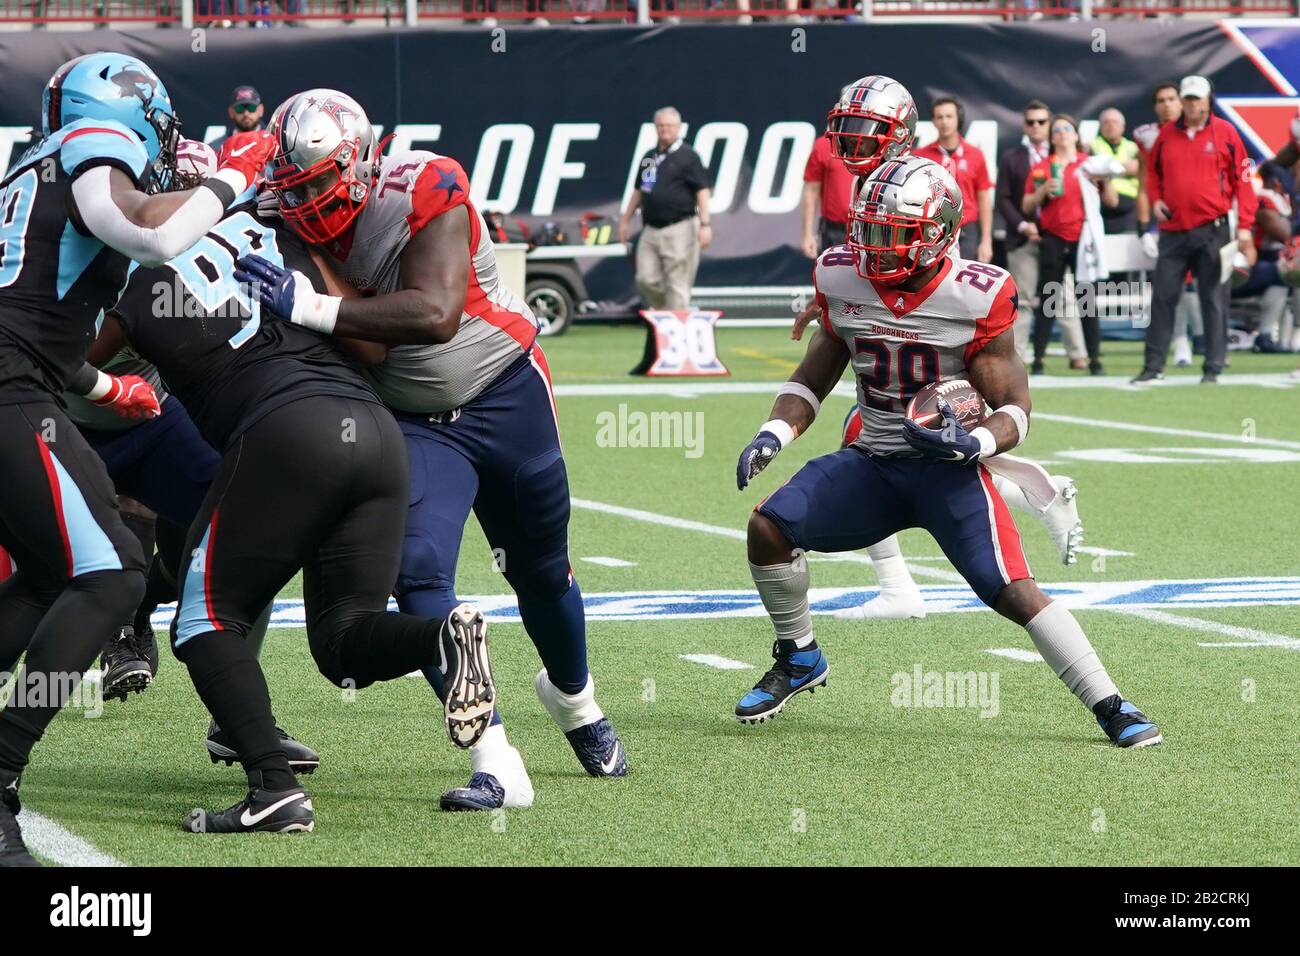 Arlington, United States. 01st Mar, 2020. Houston Roughnecks running back James Butler (28) attempts to find an opening in the line behind the blocking of offensive lineman Avery Gennesy (74) during an XFL football game, Sunday, Mar. 1, 2020, in Arlington, Tex. The Roughnecks defeated the Renegades 27-20. (Wayne Gooden/Image of Sport) Photo via Credit: Newscom/Alamy Live News Stock Photo